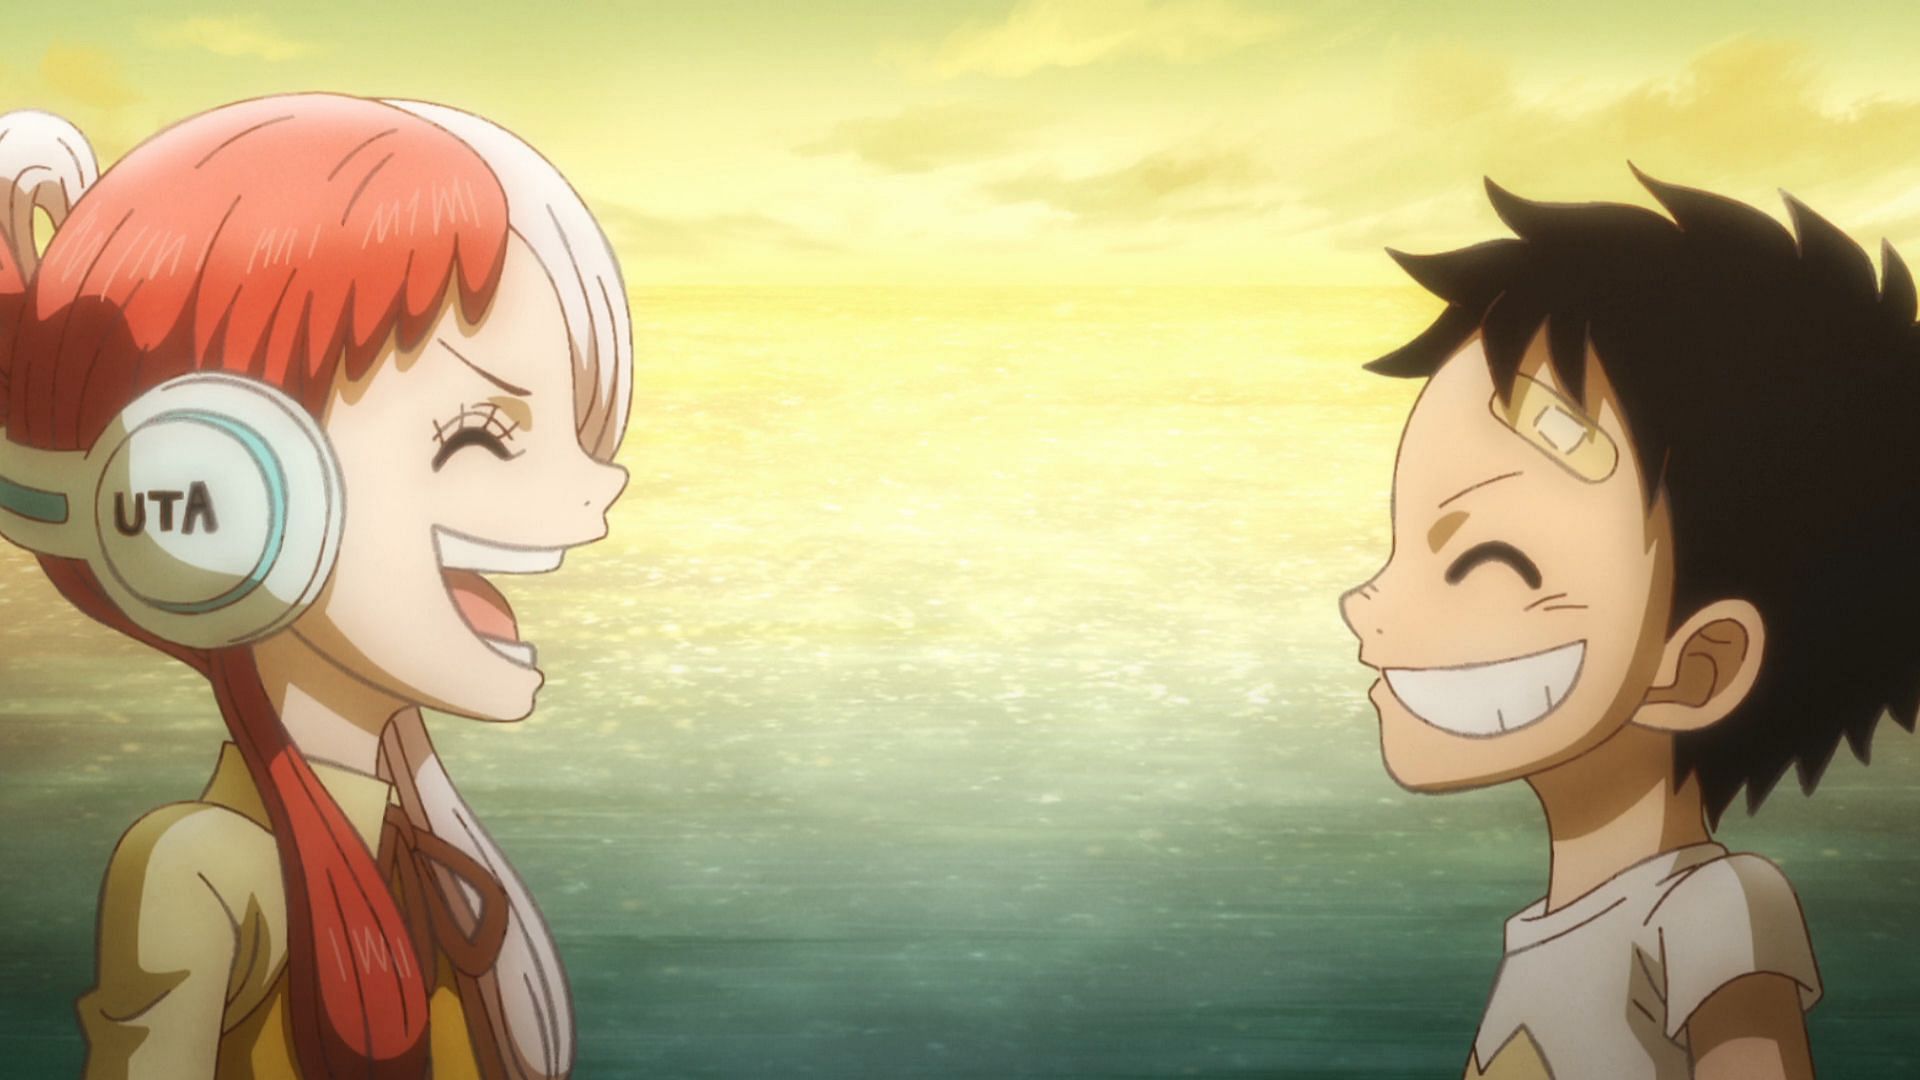 Uta and Luffy will make some promises in One Piece Episode 1030 (Image via Toei Animation)